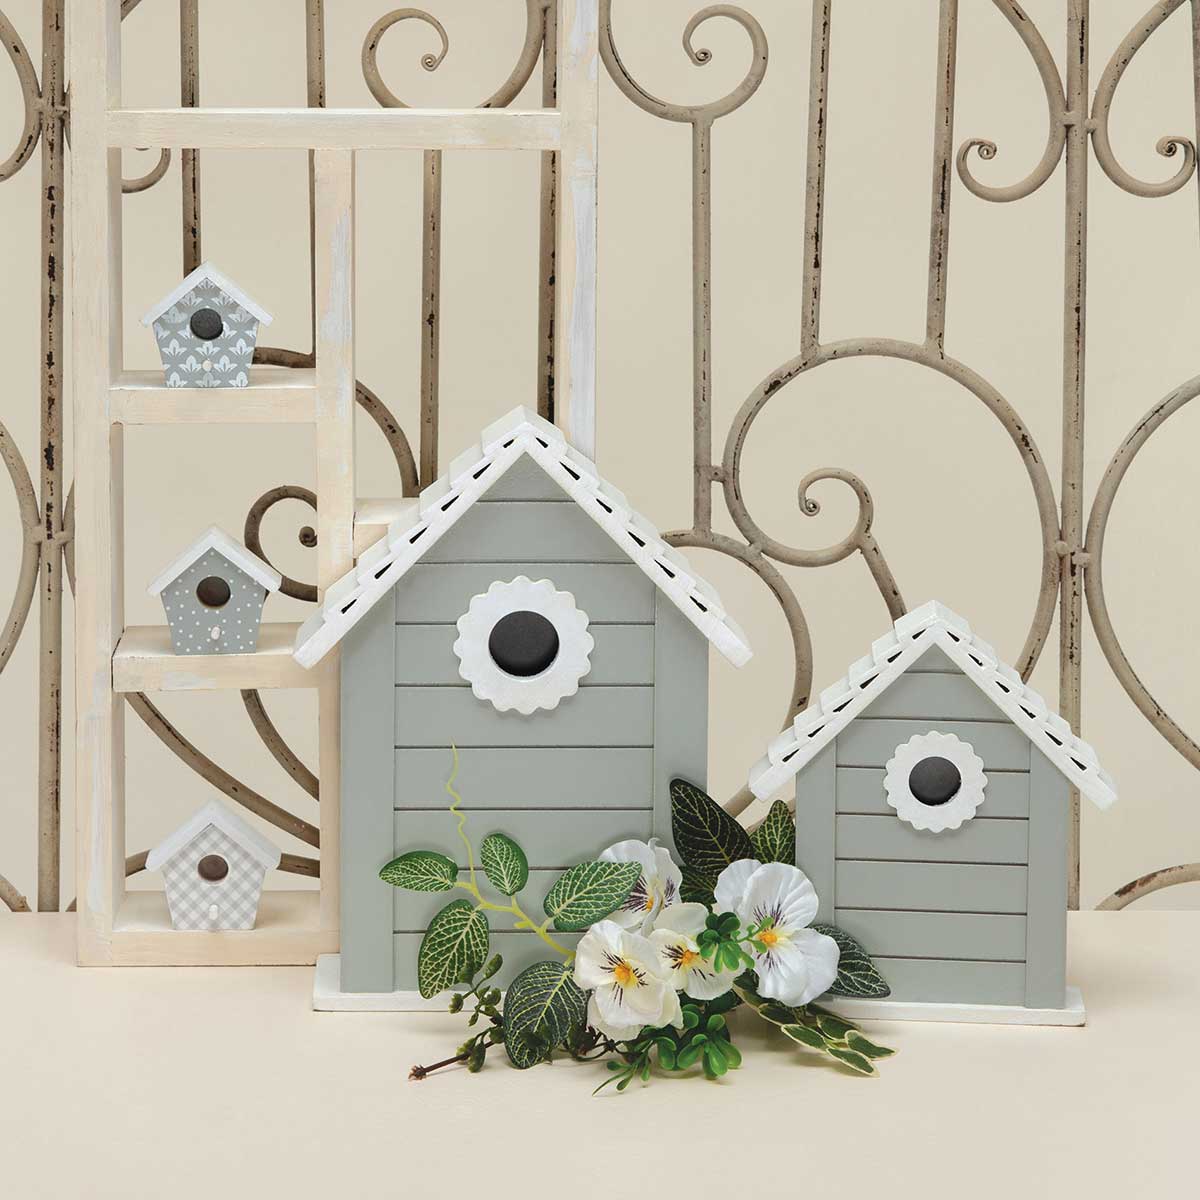 b50 BIRDHOUSE SLAT GREY SMALL 6IN X 1.5IN X 7IN WOOD - Click Image to Close